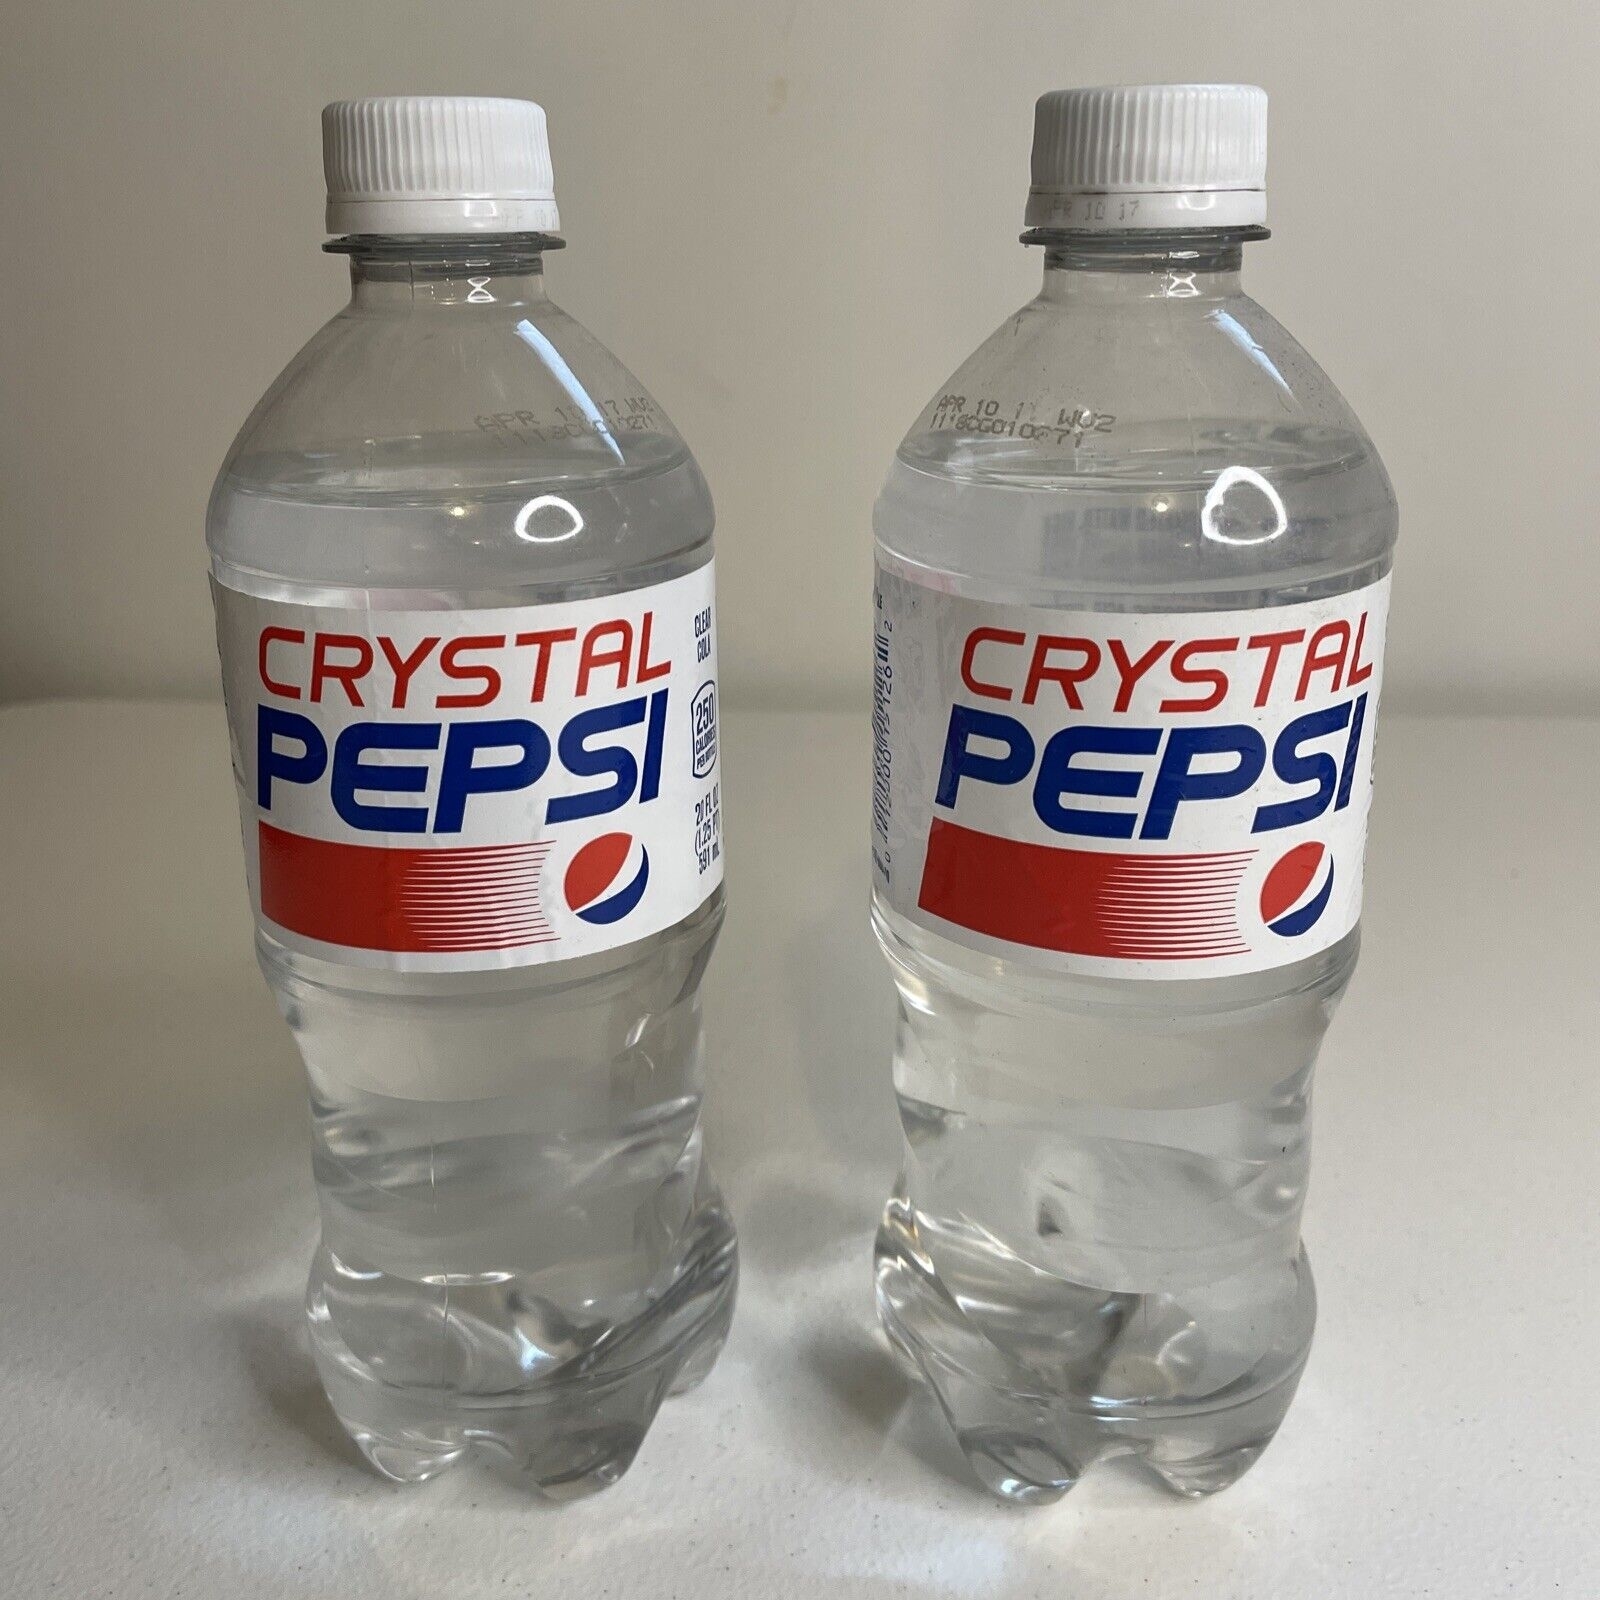 Clear bottles of Crystal Pepsi